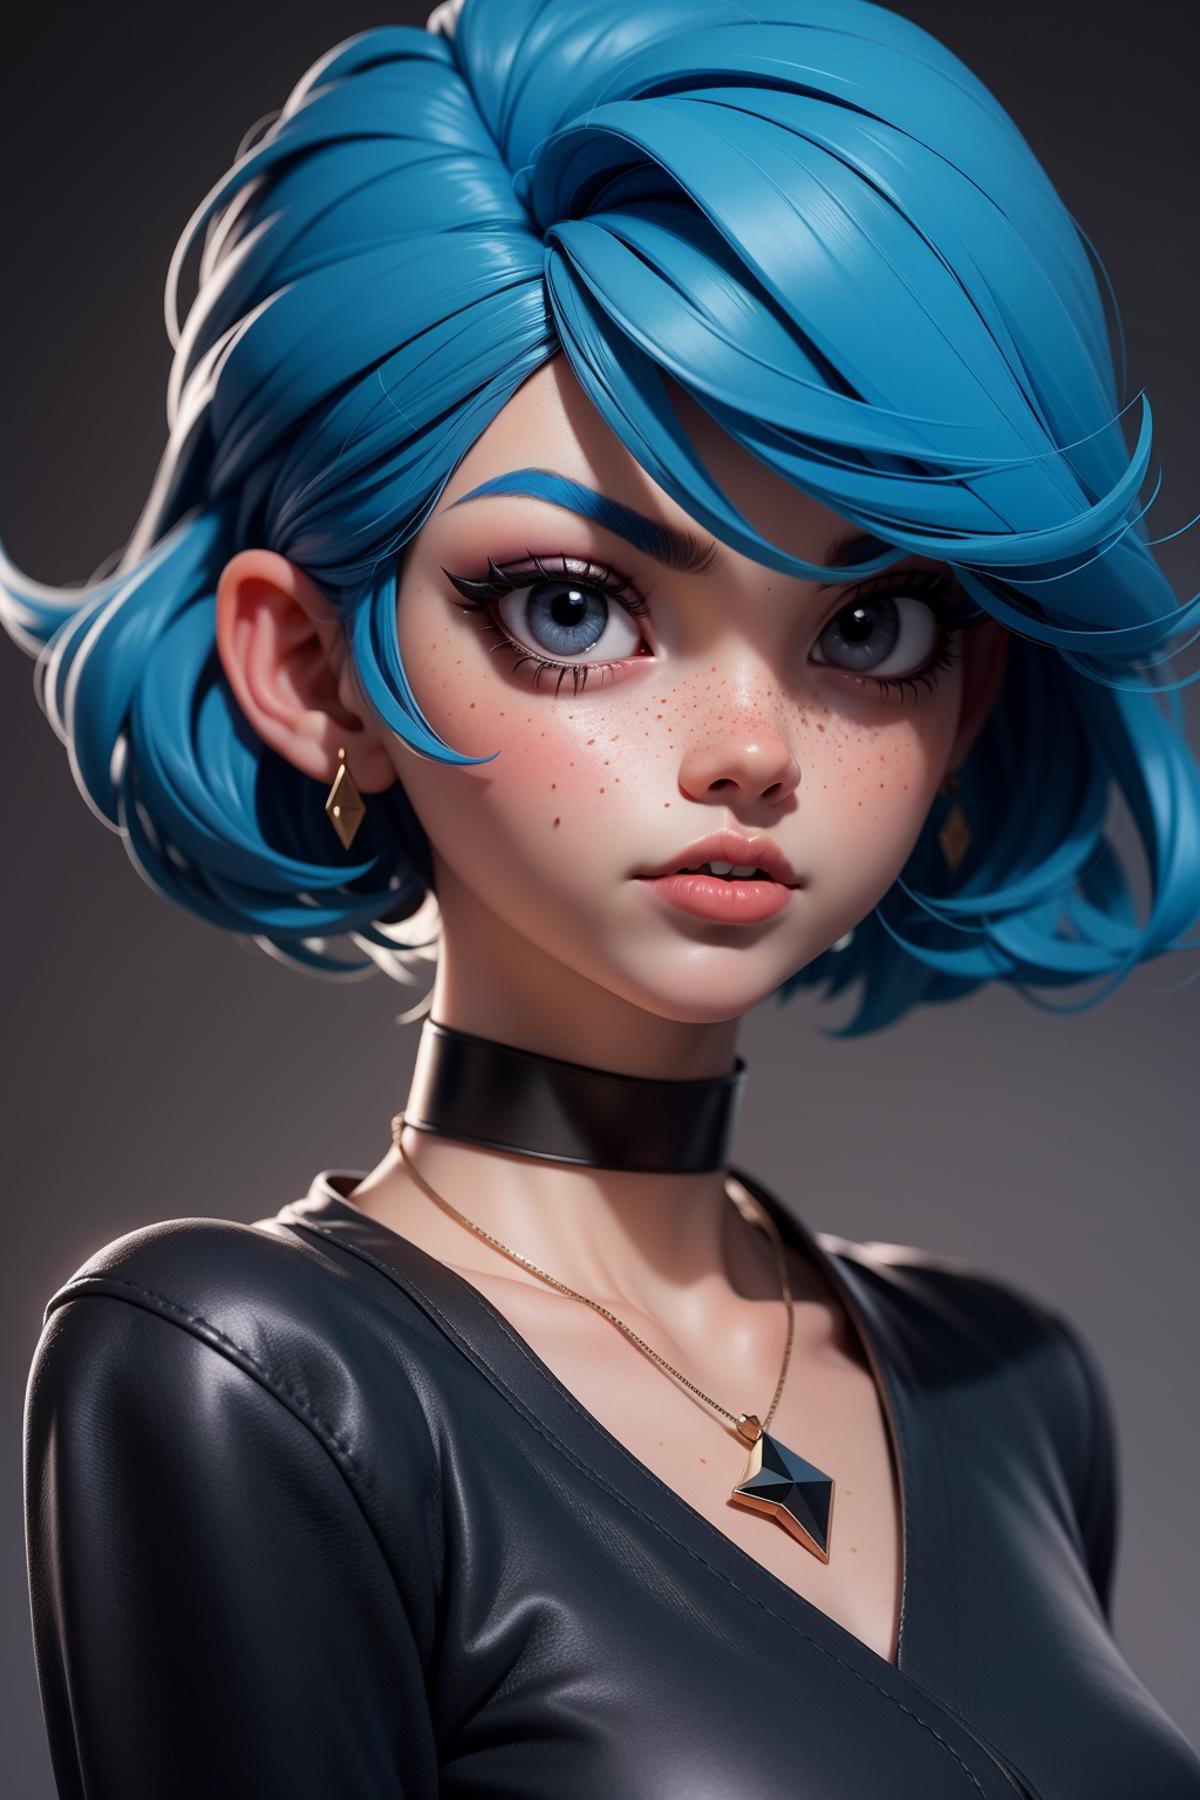 A CGI artwork of a blue-haired anime girl wearing a black shirt and a necklace.